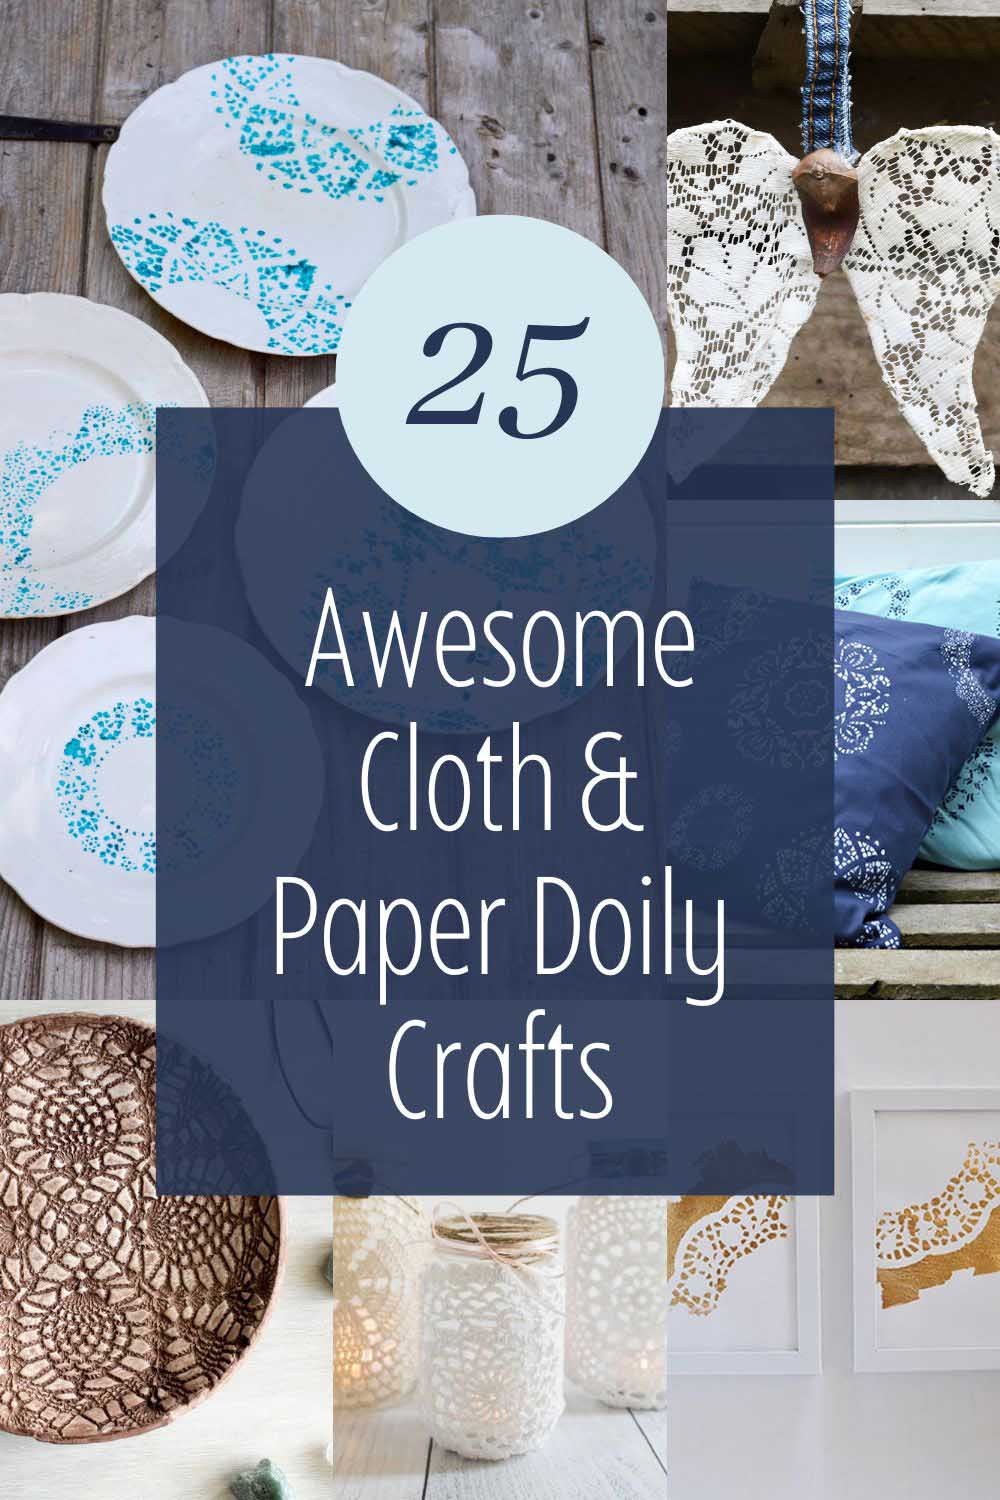 18 Easy Cloth and Paper Doily Crafts I Can't Wait To Try   Pillar ...